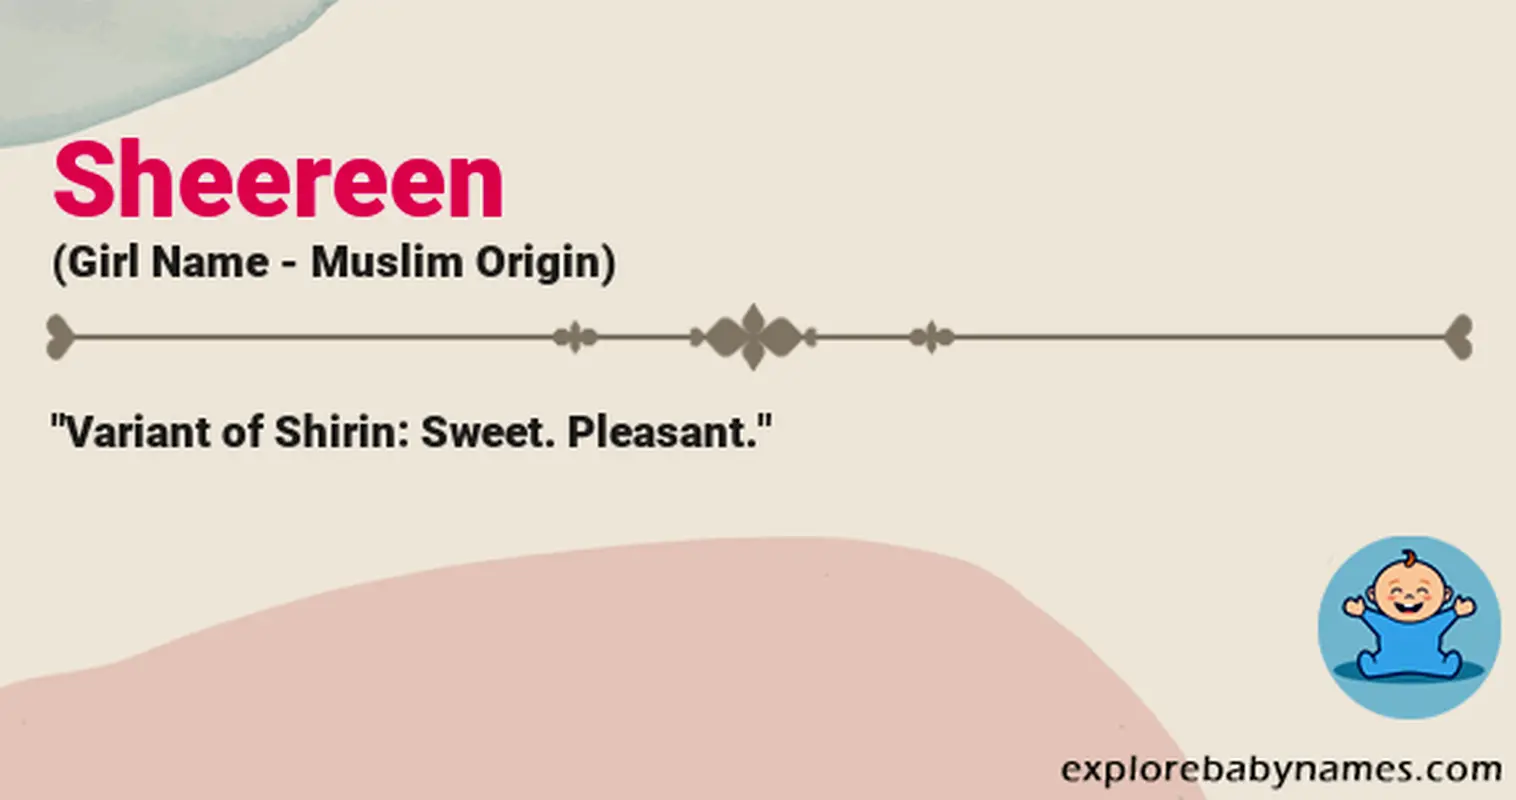 Meaning of Sheereen